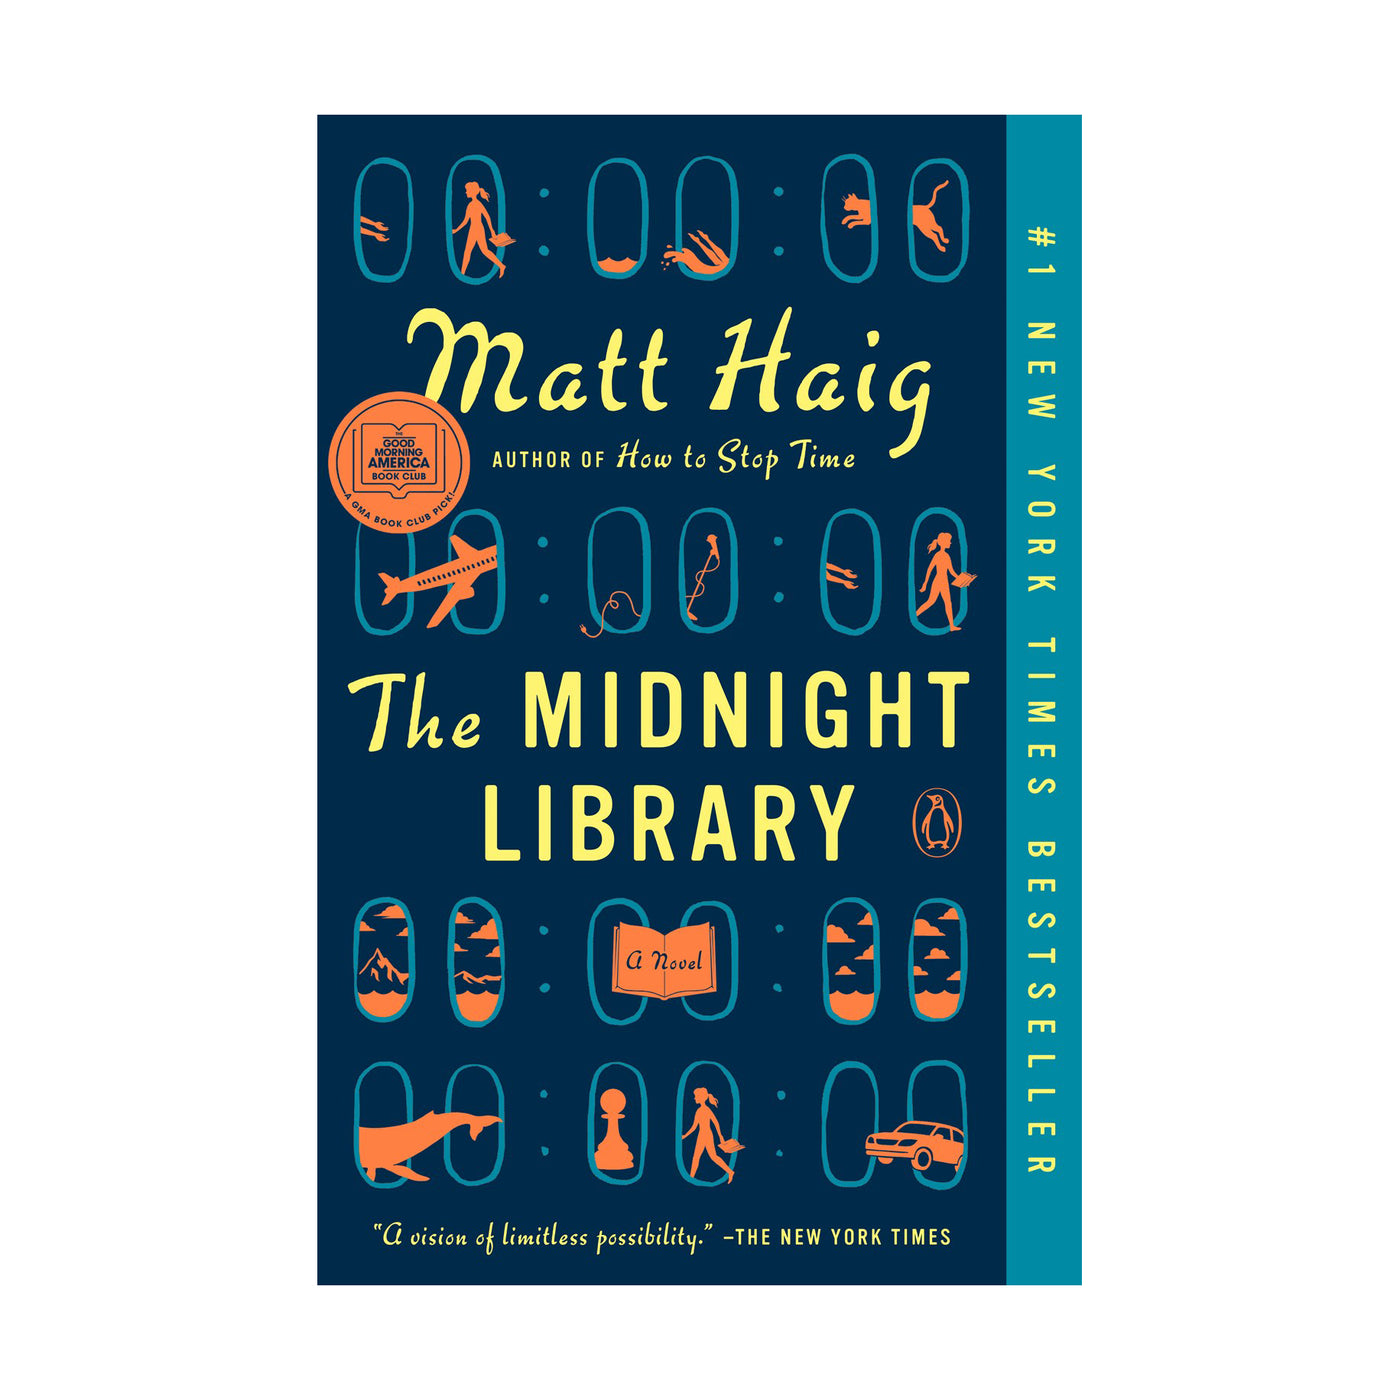 Midnight Library - Paperback, OE Book Club, June